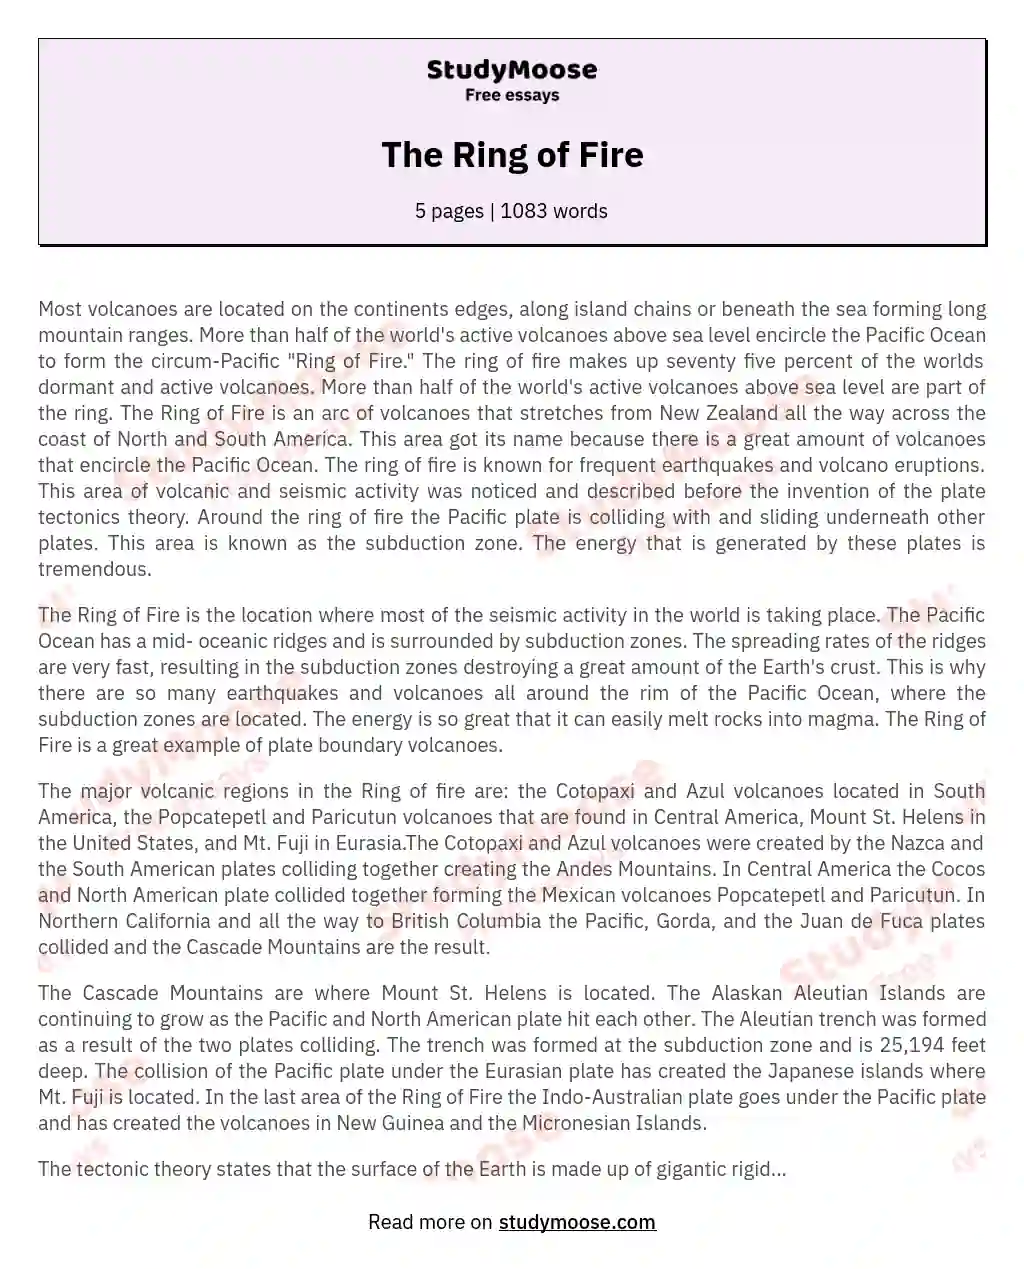 The Ring of Fire essay